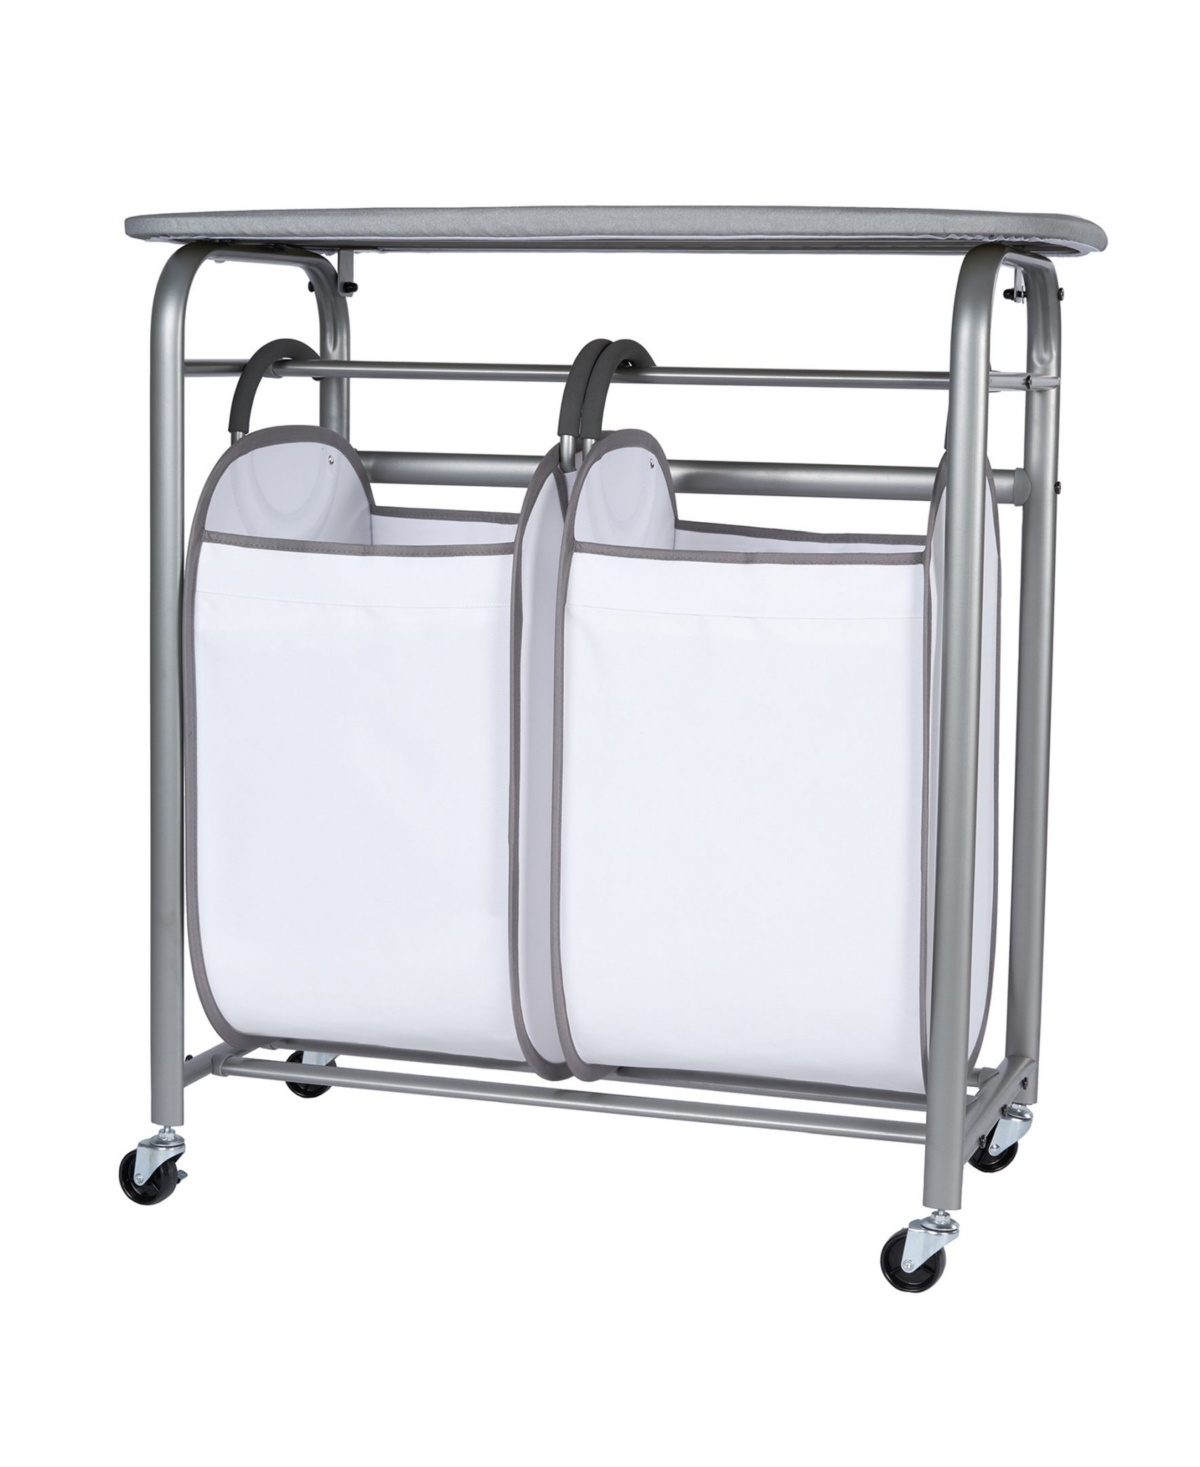 Neatfreak Easy Access Double Laundry Sorter With Folding Table In Brushed Nickel